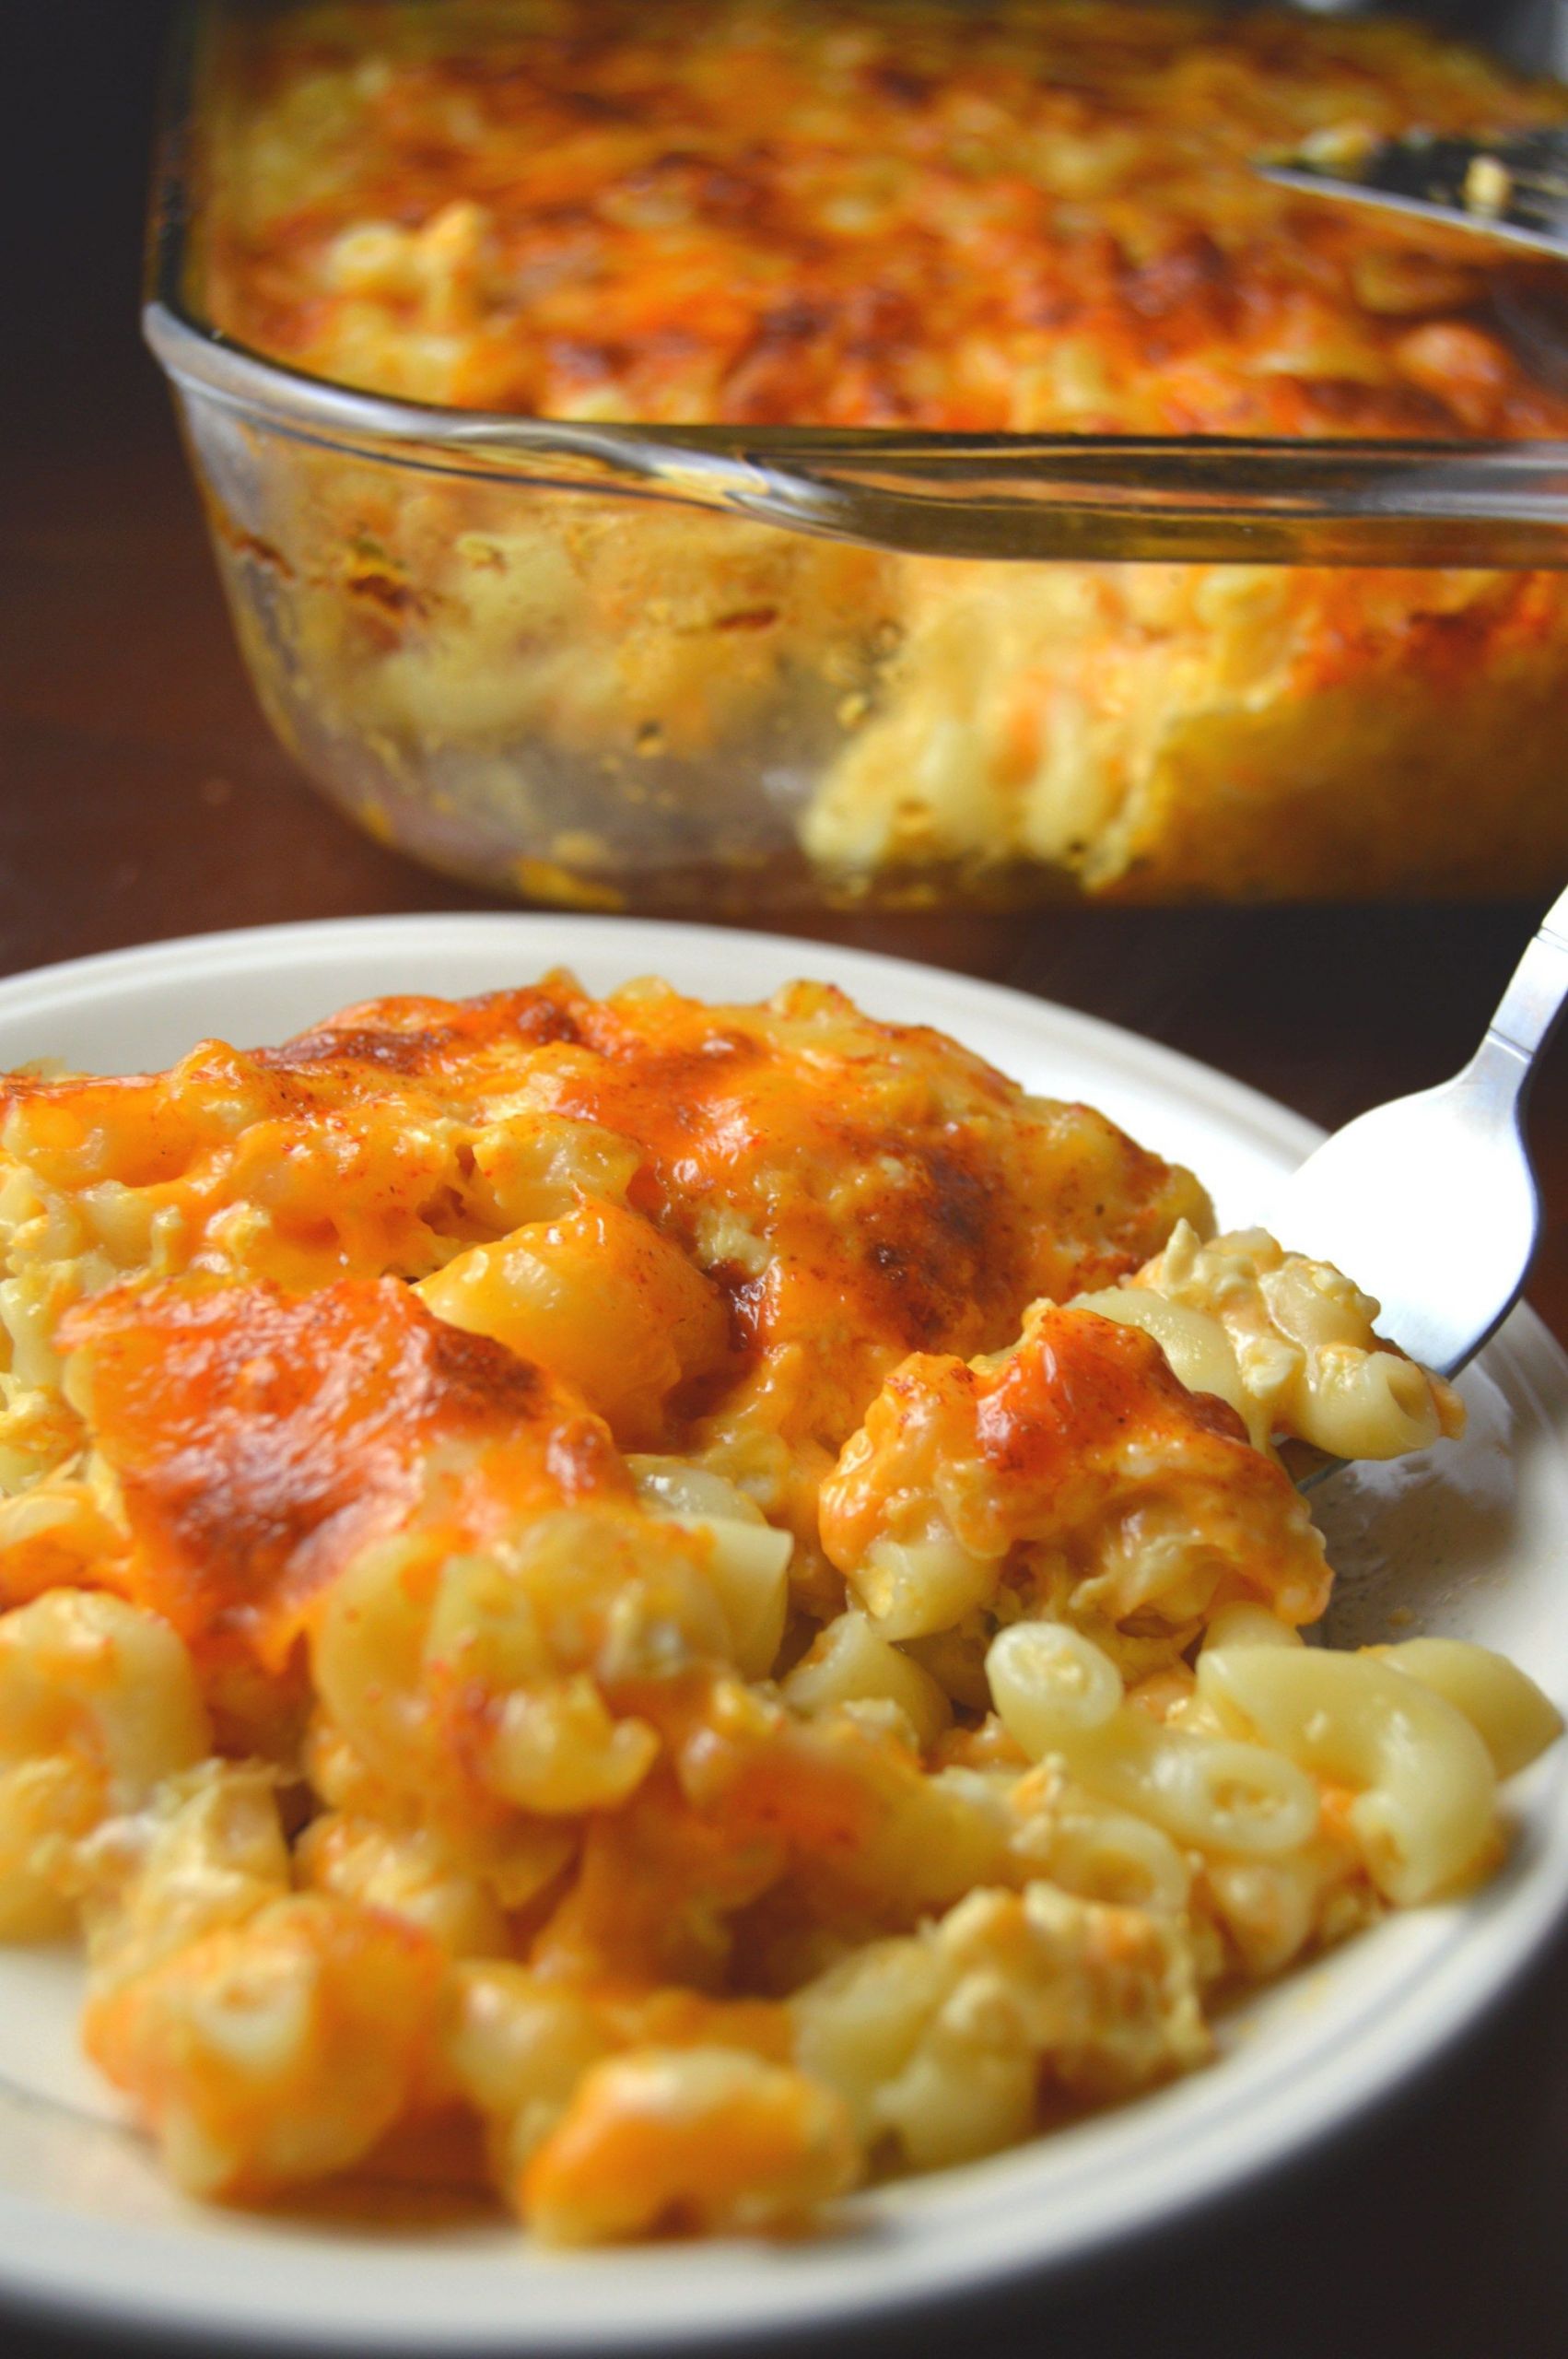 Best Baked Macaroni And Cheese Ever
 Baked Macaroni and Cheese Recipe